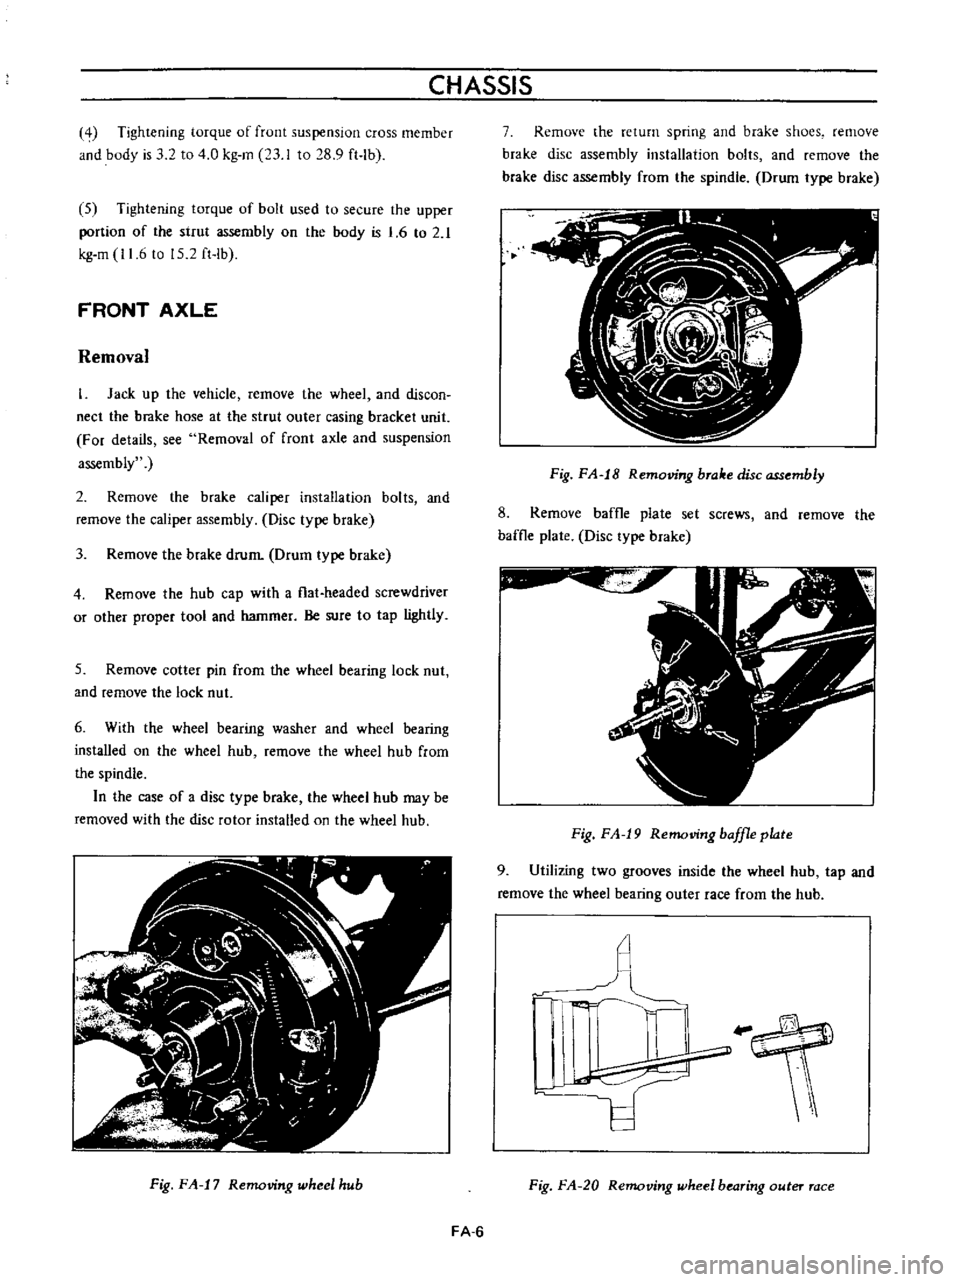 DATSUN B110 1973  Service User Guide 
CHASSIS

Tightening

torque 
of

front

suspension 
cross 
member

and

body 
is 
3 
2 
to 
4 
0

kg 
m 
23

1 
to 
28

9 
ft

Ib

5

Tightening 
torque 
of 
bolt

used 
to

secure 
the

upper

porti